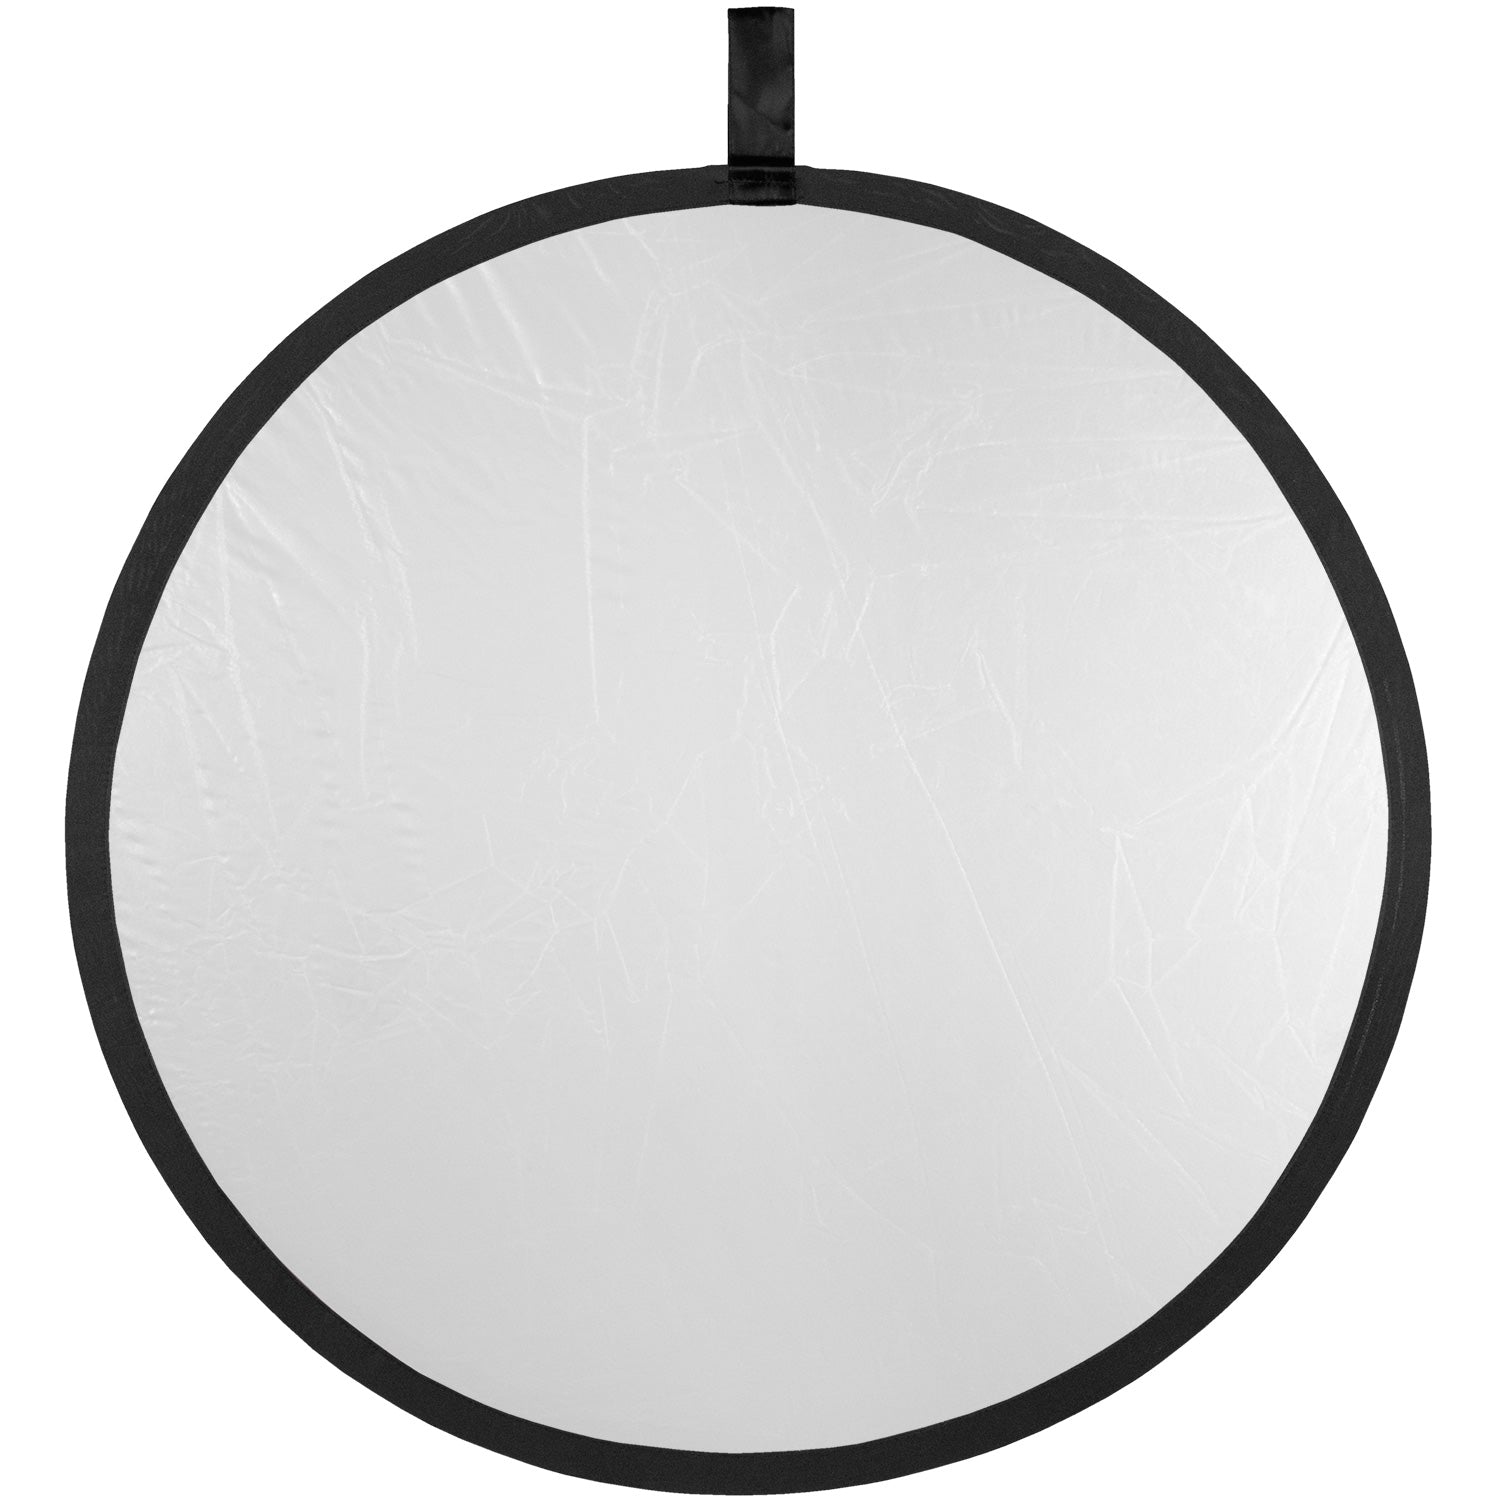 Collapsible 2-in-1 Sunlight/White Bounce Reflector (30")